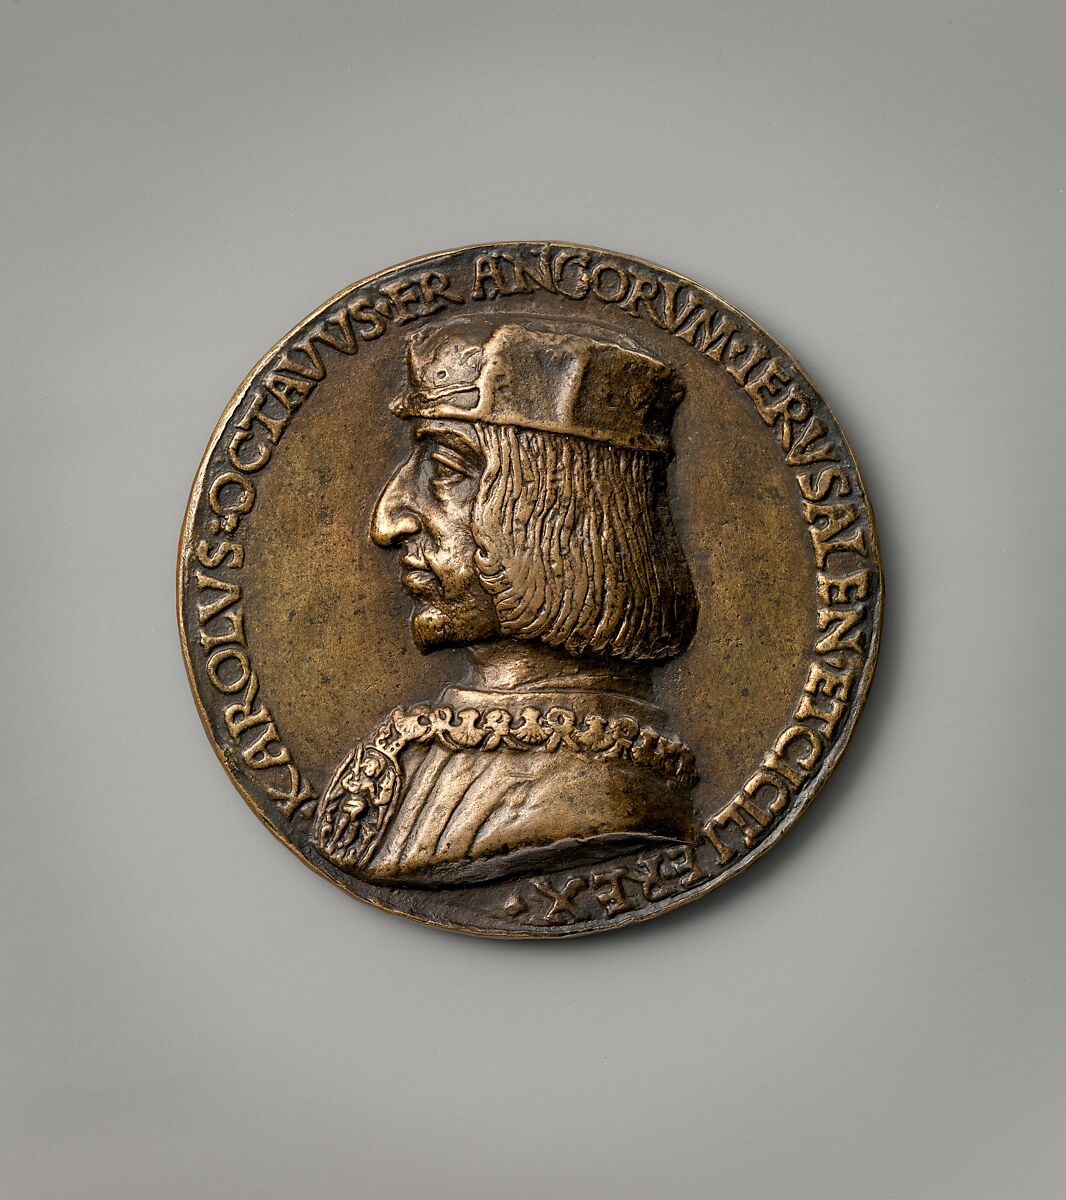 Charles VIII, King of France, Attributed to Niccolò Fiorentino (Niccolò di Forzore Spinelli) (Italian, Florence 1430–1514 Florence), Bronze, possibly Italian, Florence 